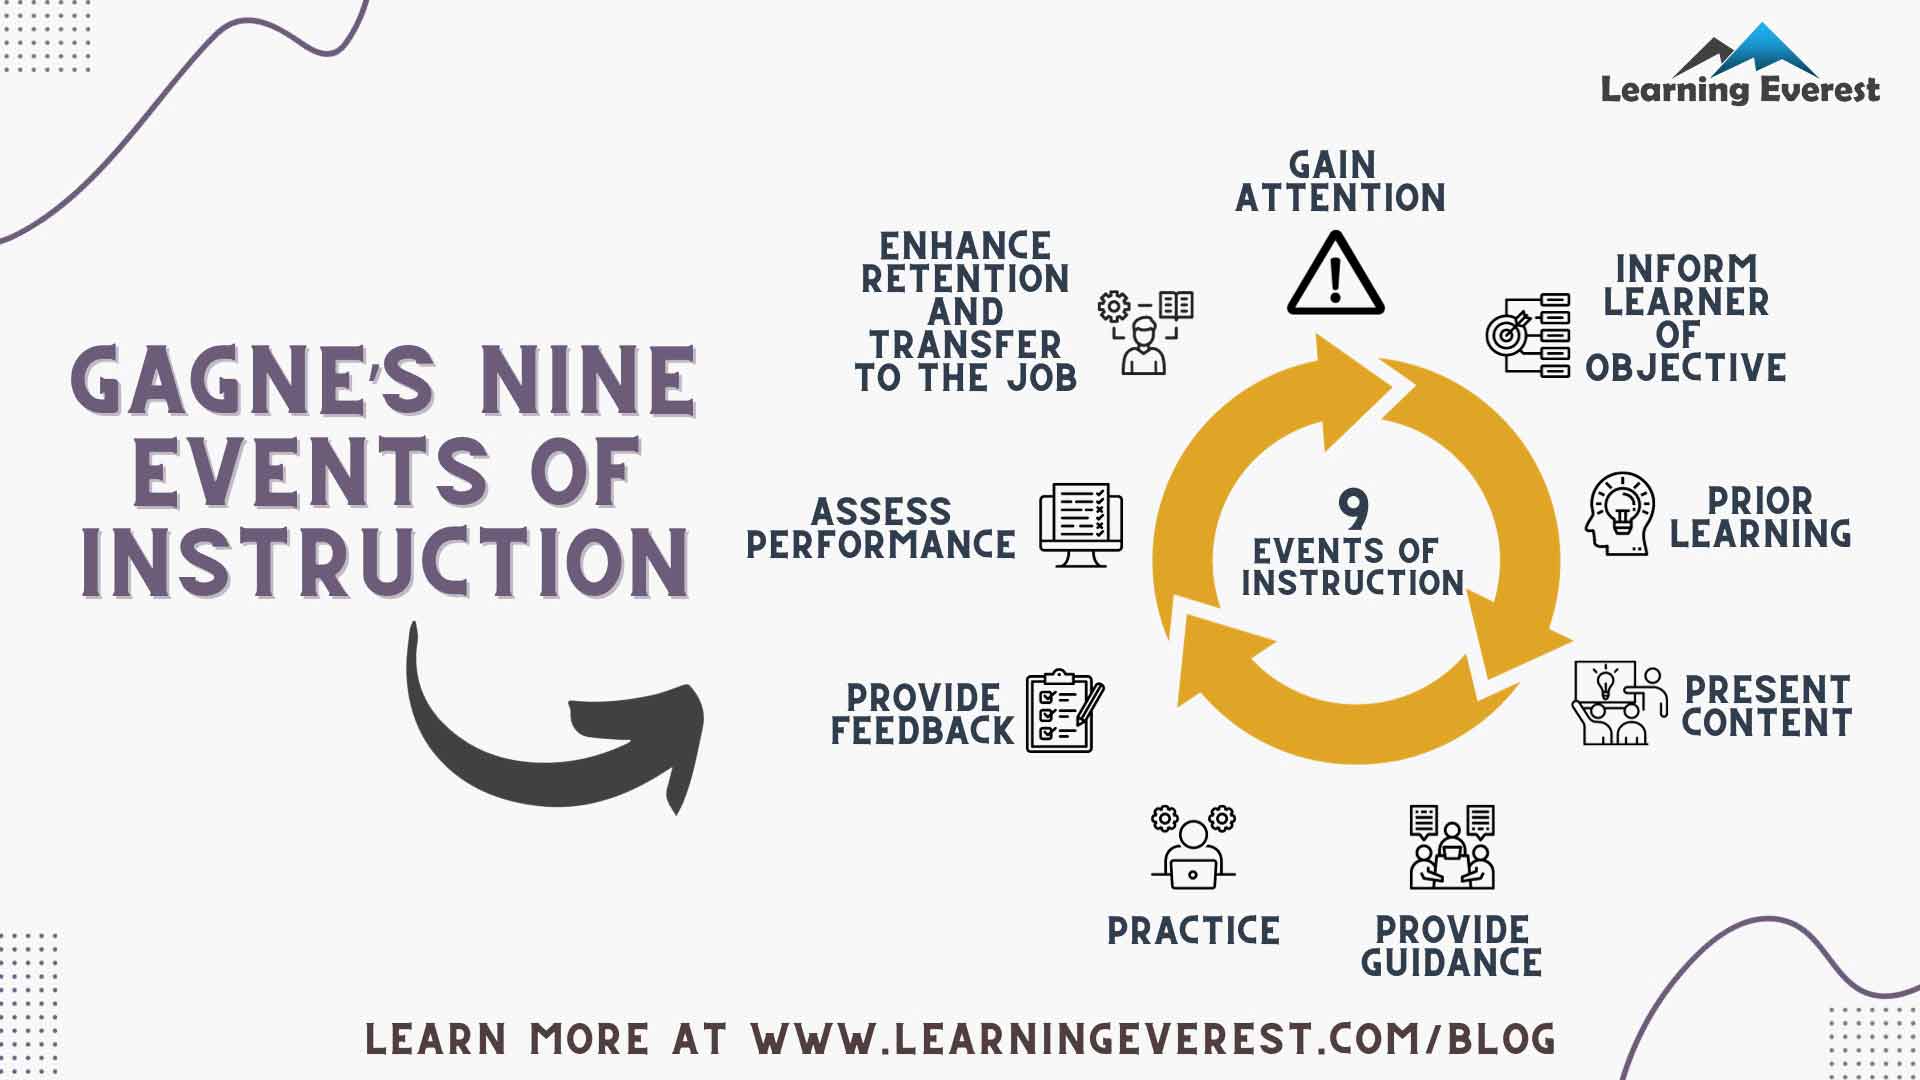 Gagne’s Nine Events of Instruction